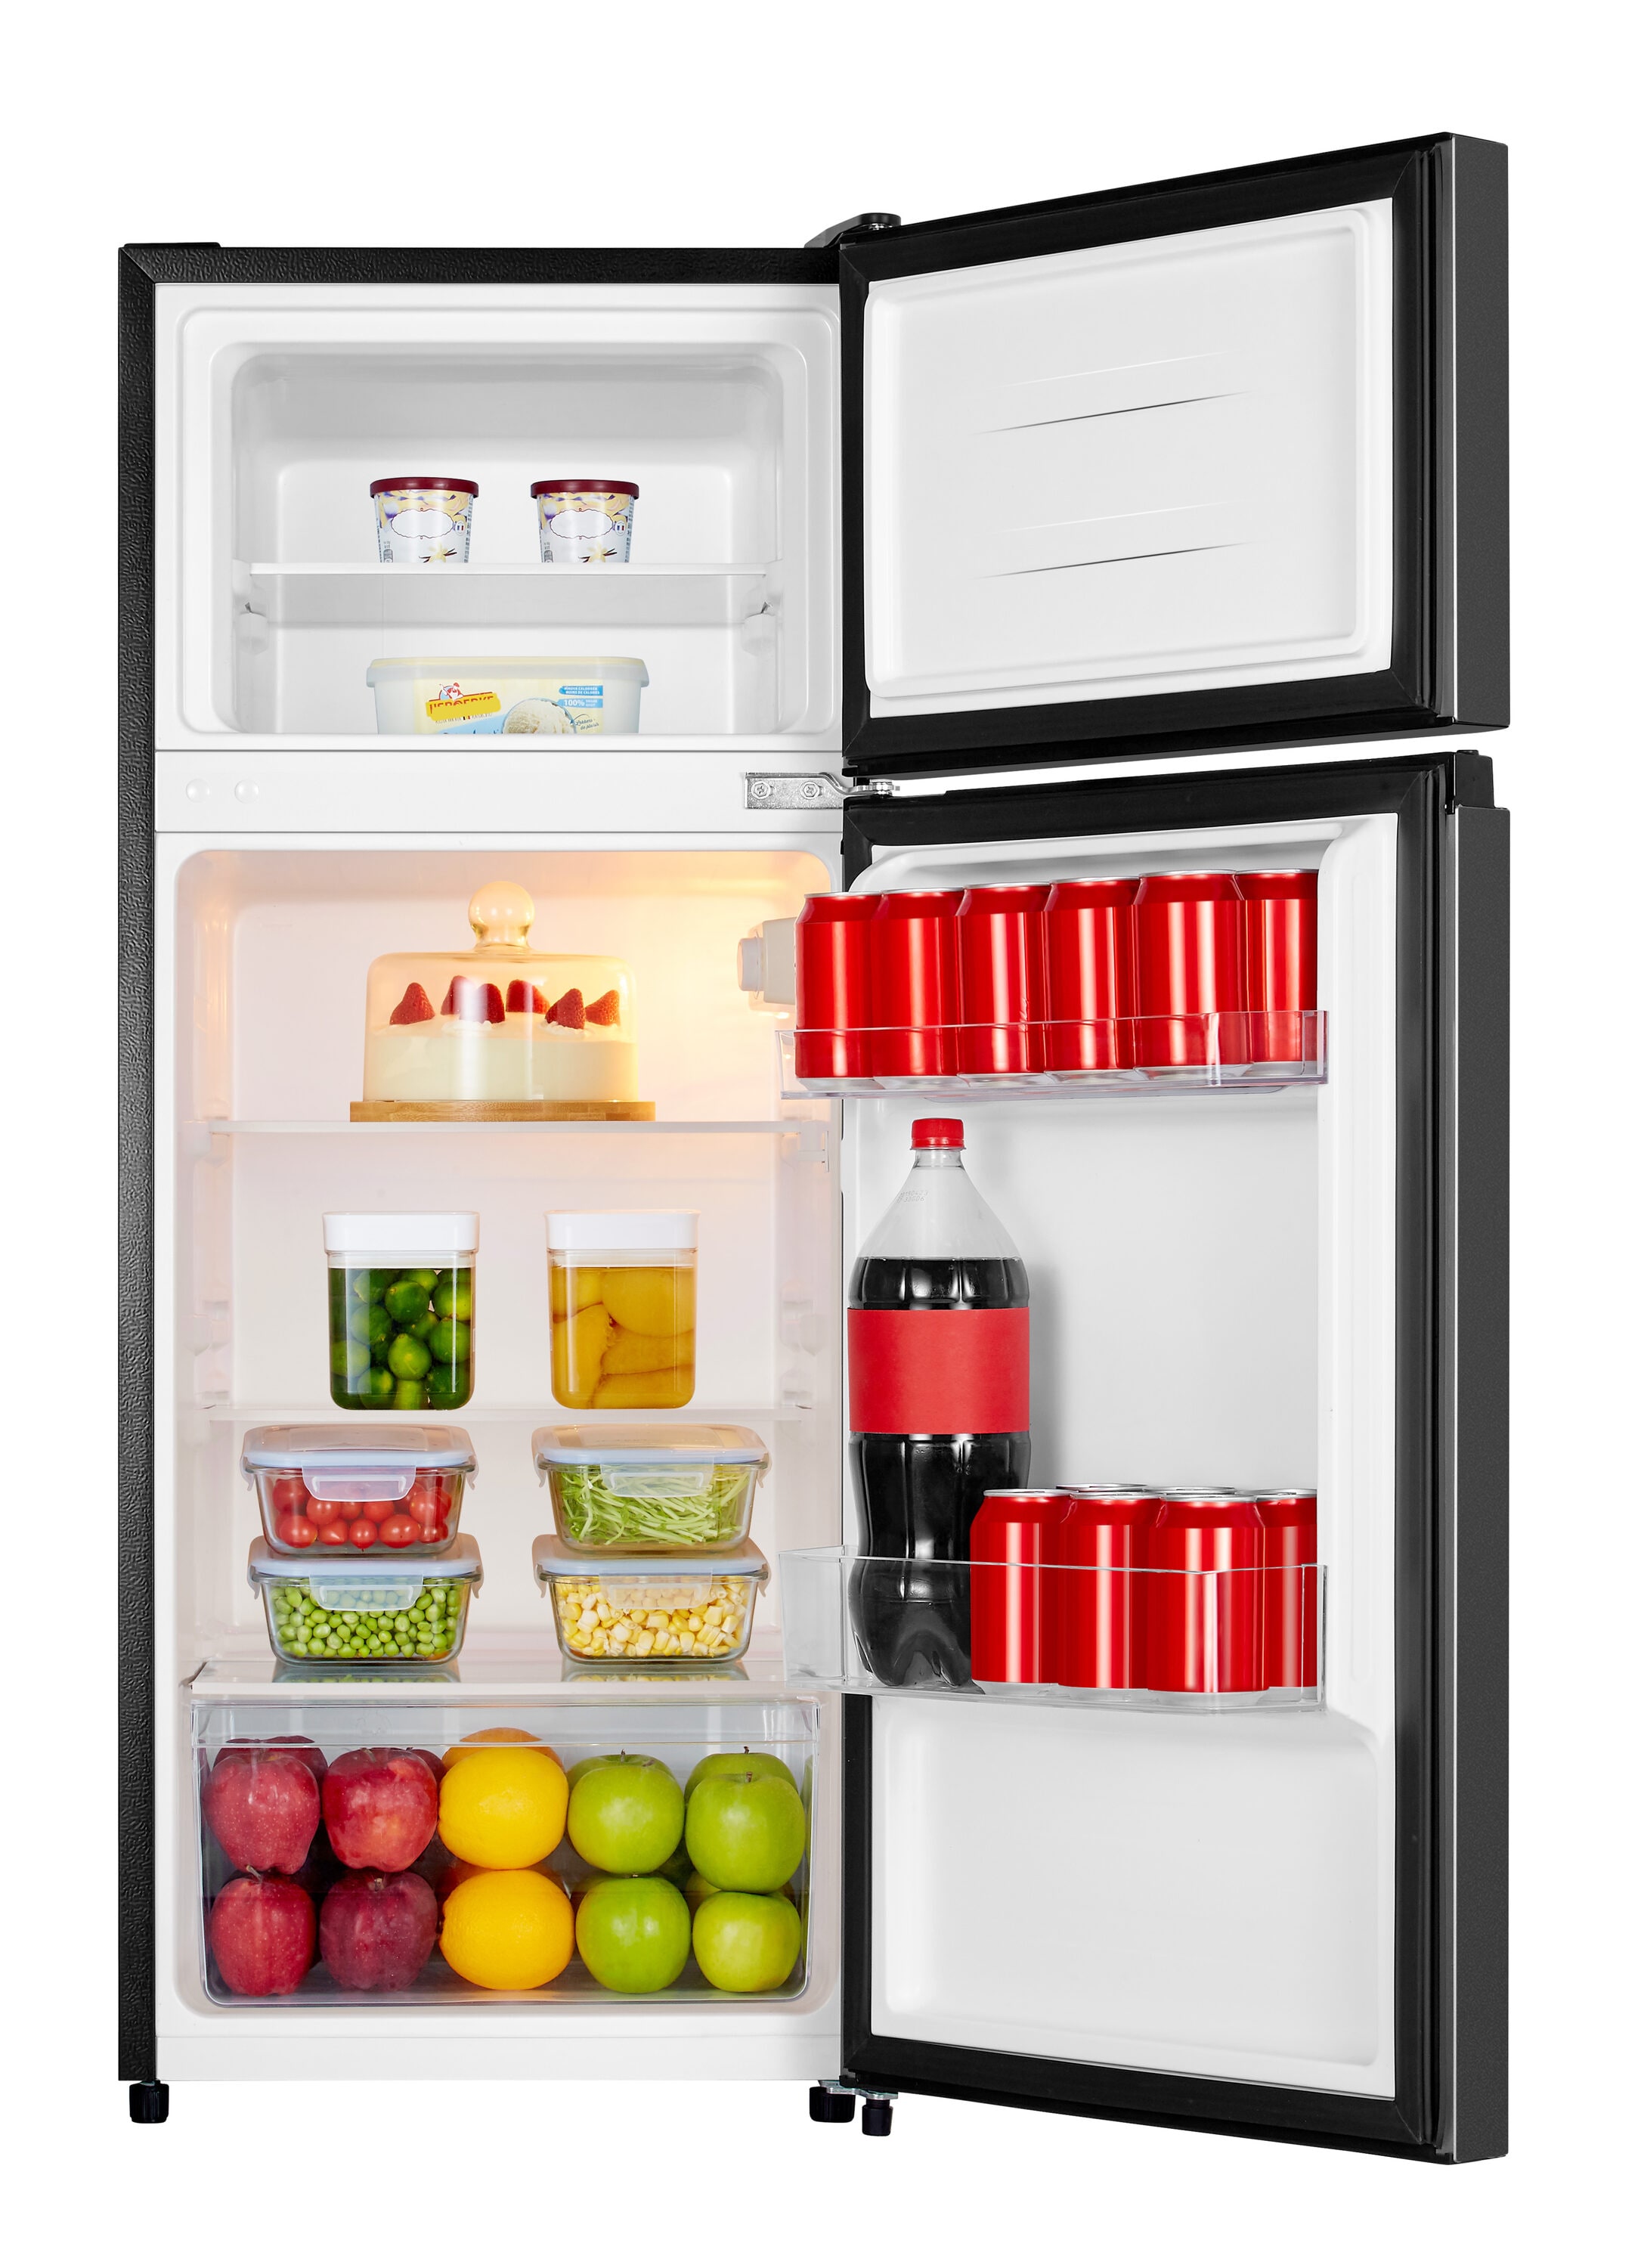 mini refrigerator price, mini refrigerator price Suppliers and  Manufacturers at